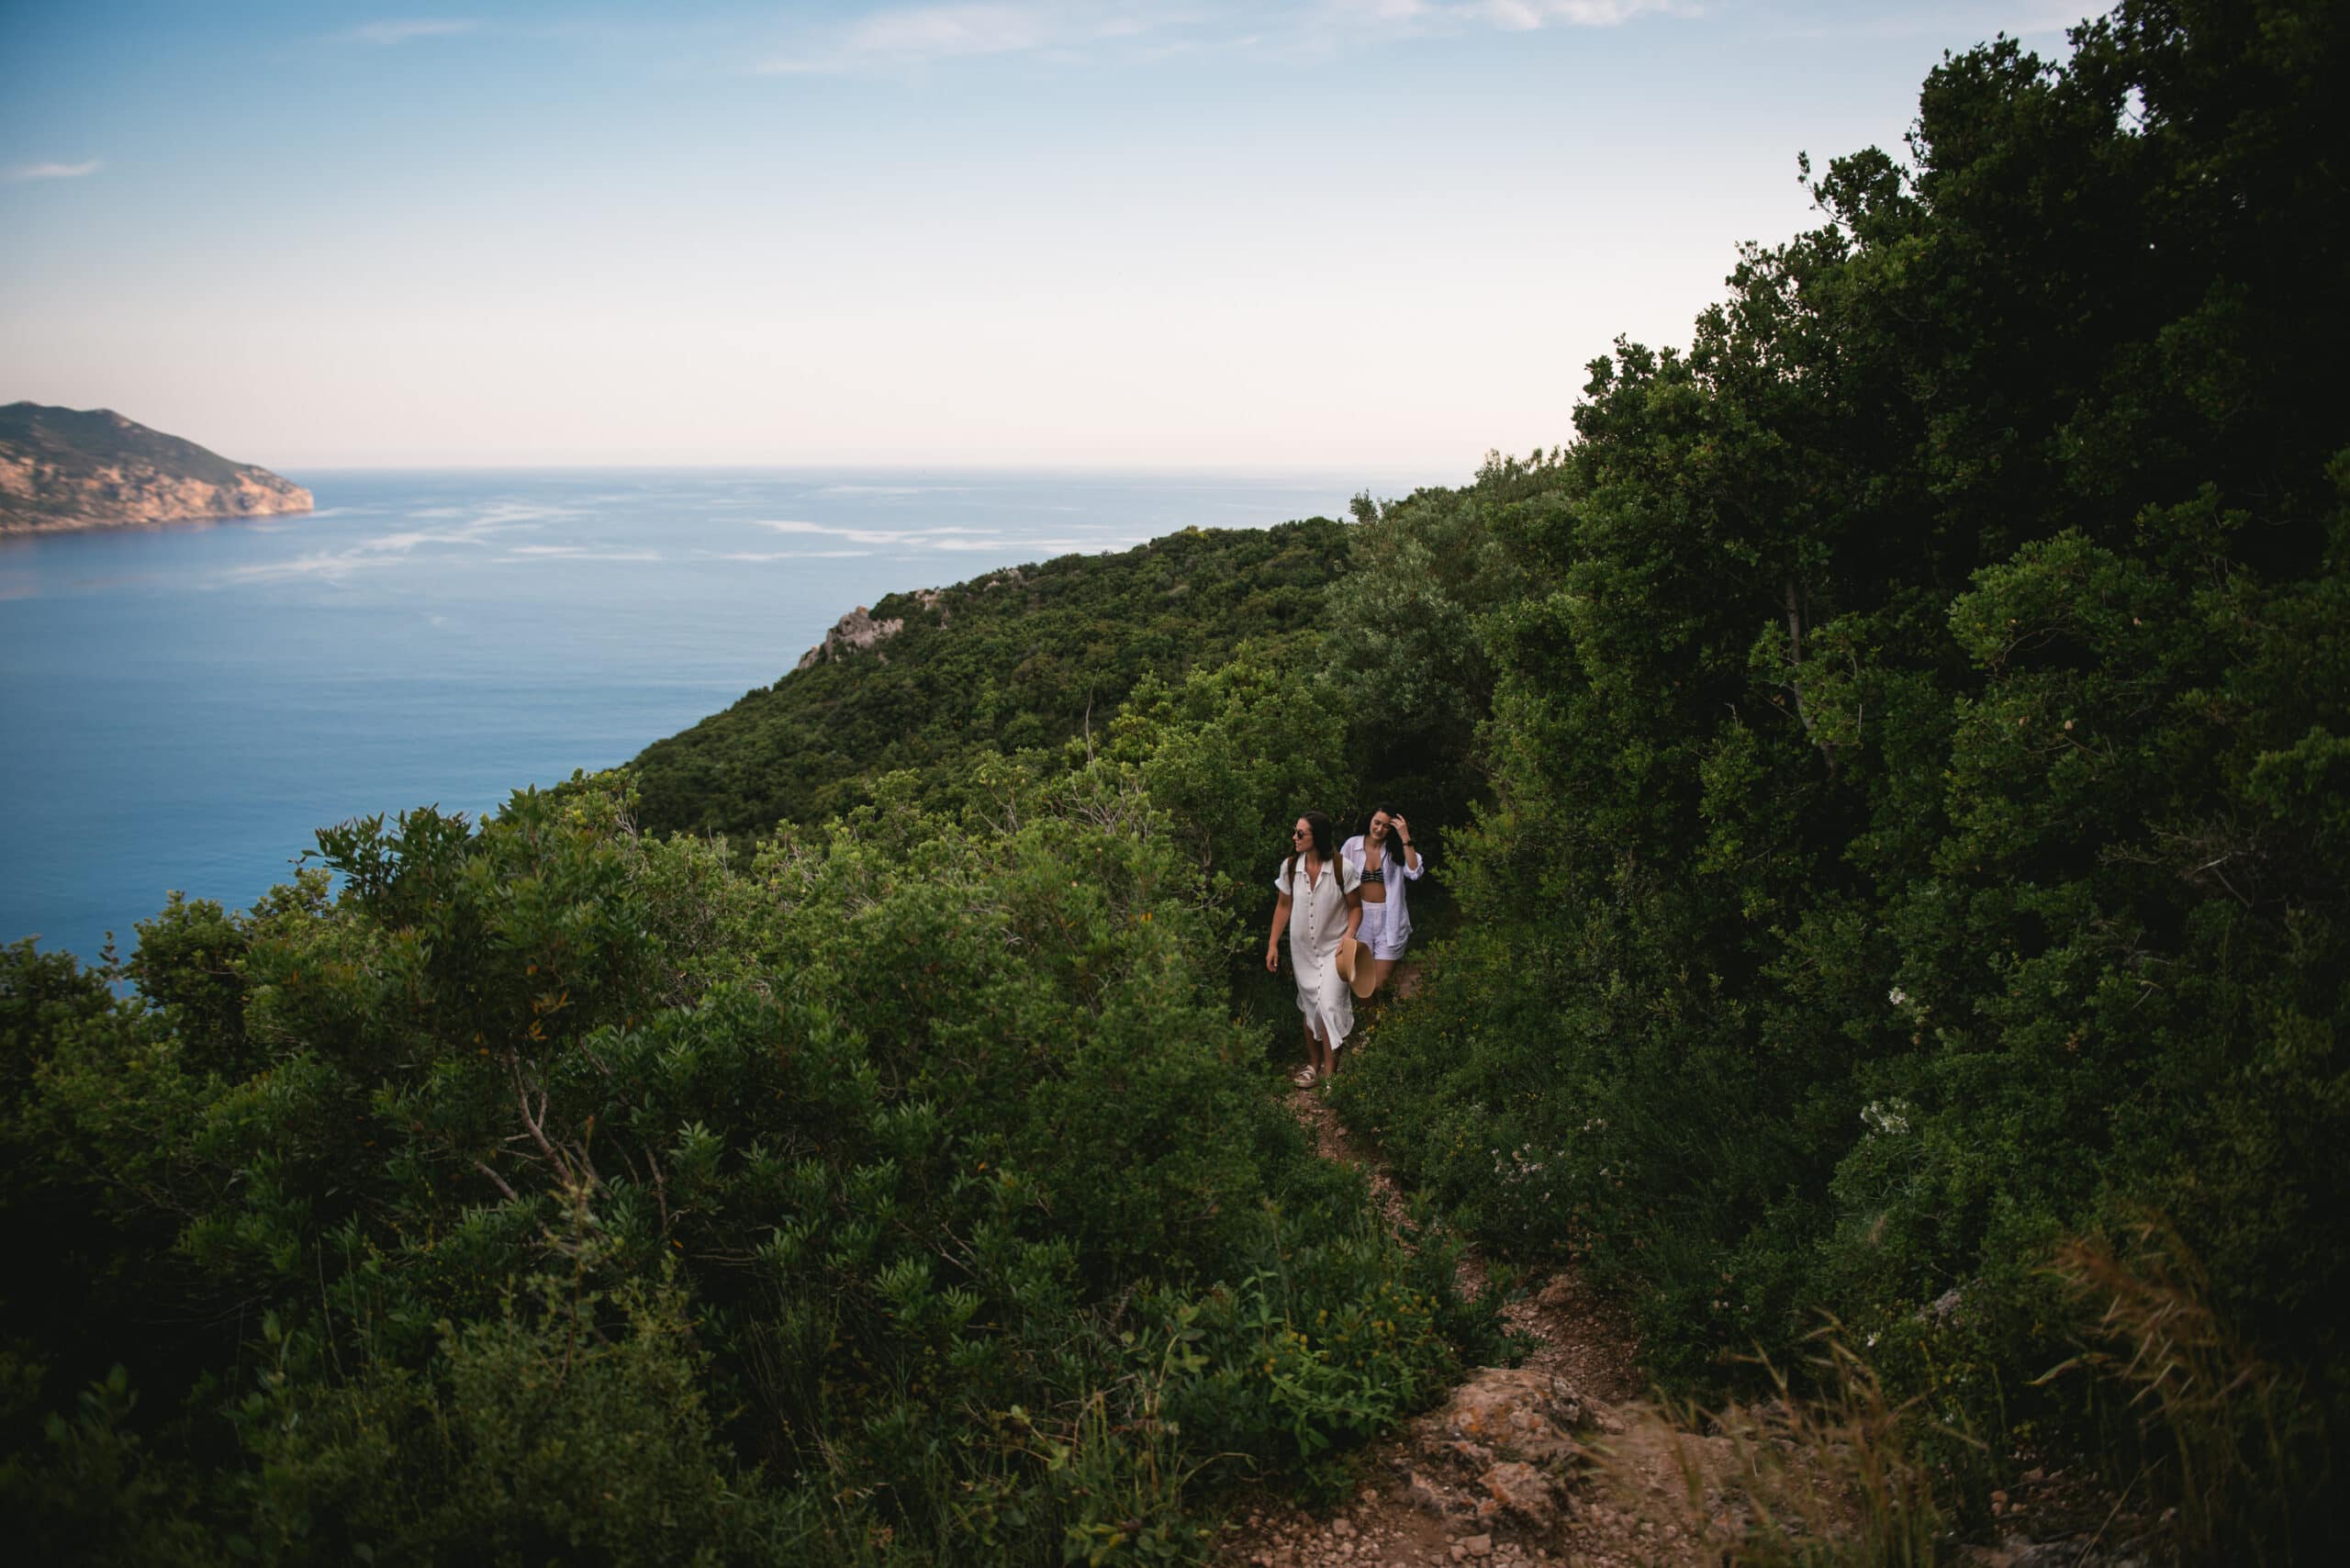 Brides walking amidst the lush bushes, immersing themselves in the natural surroundings of Corfu.